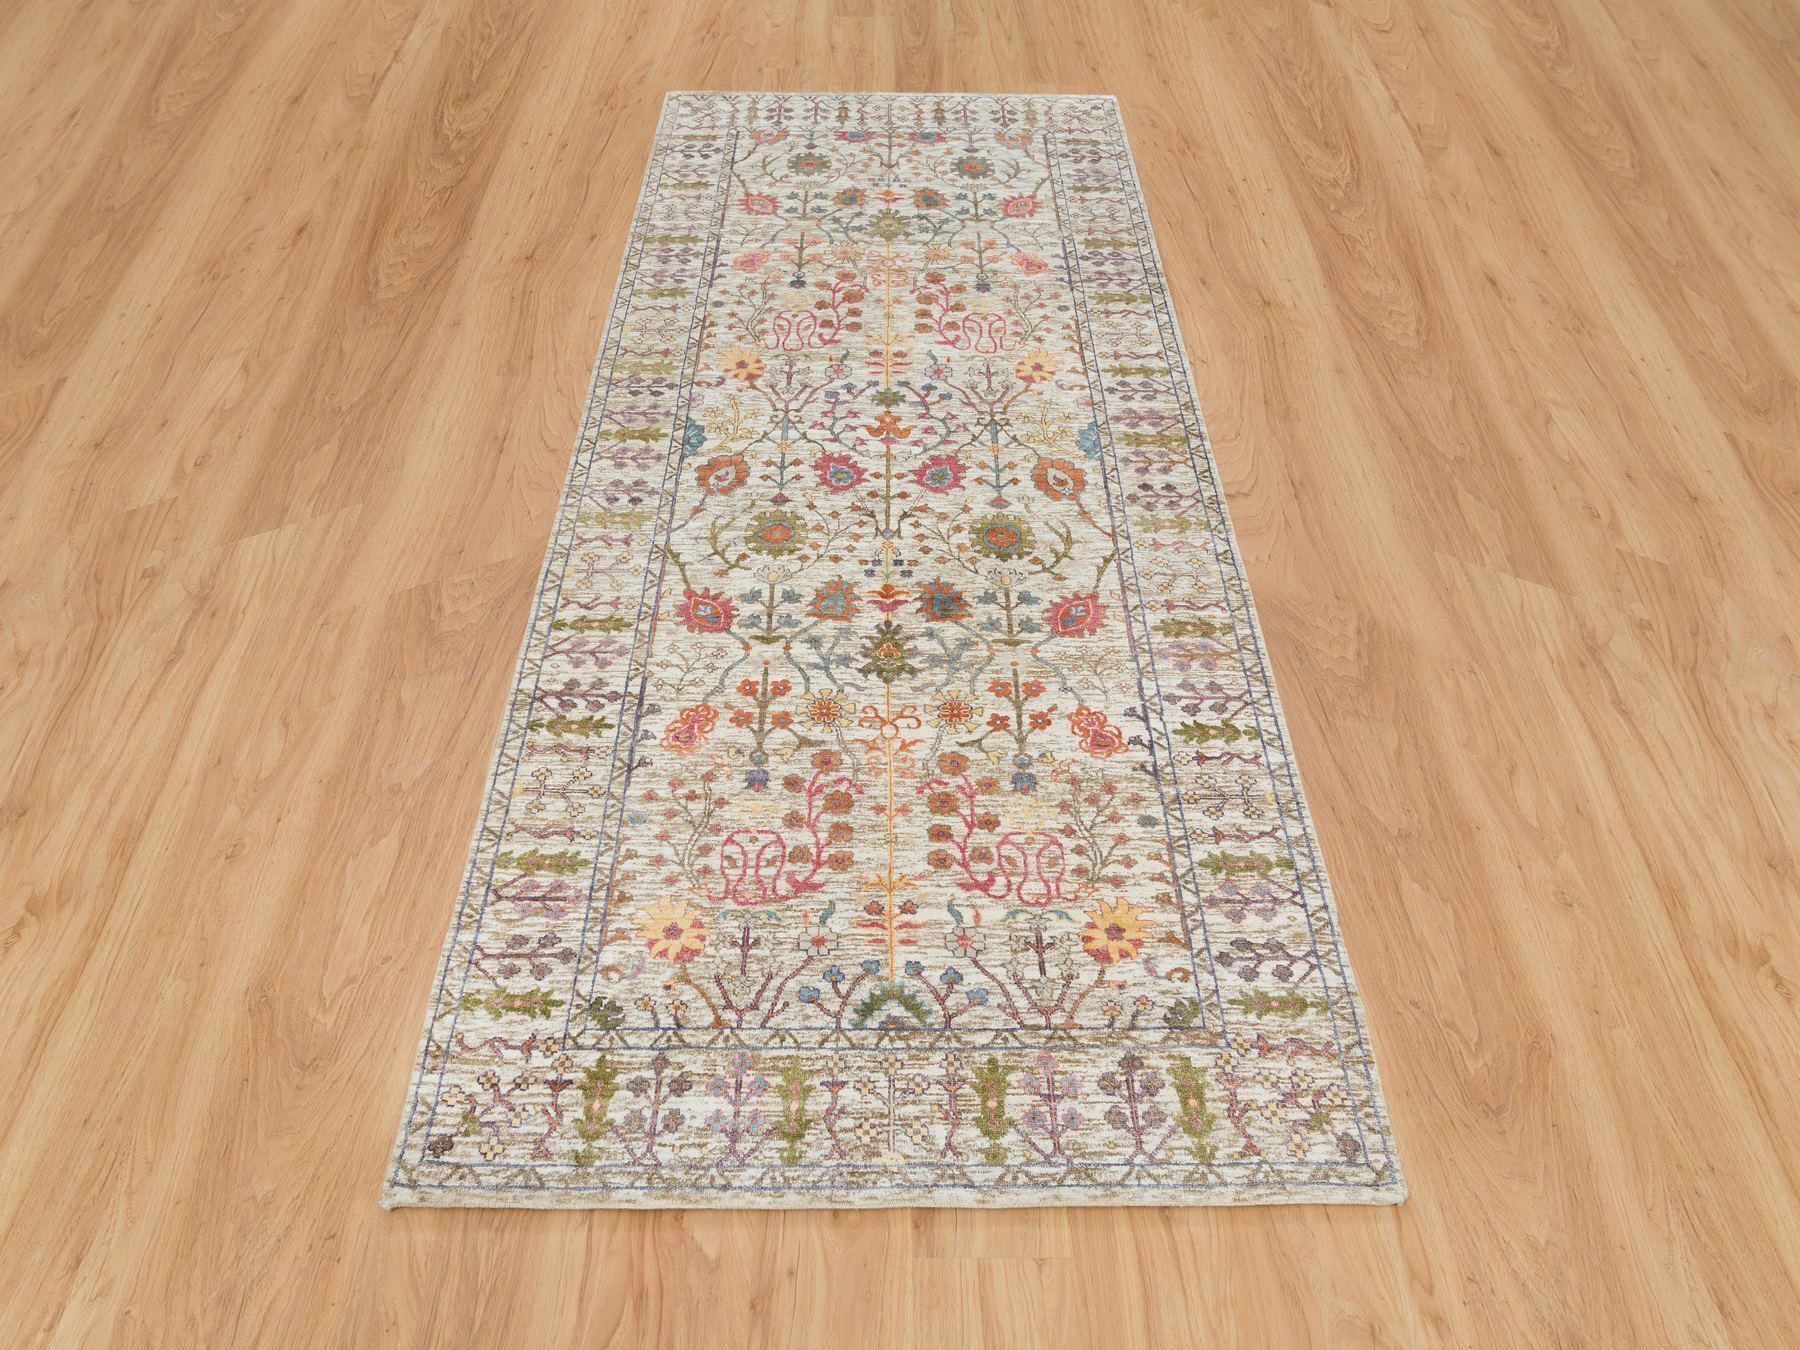 Wool and Silk Rugs LUV593208